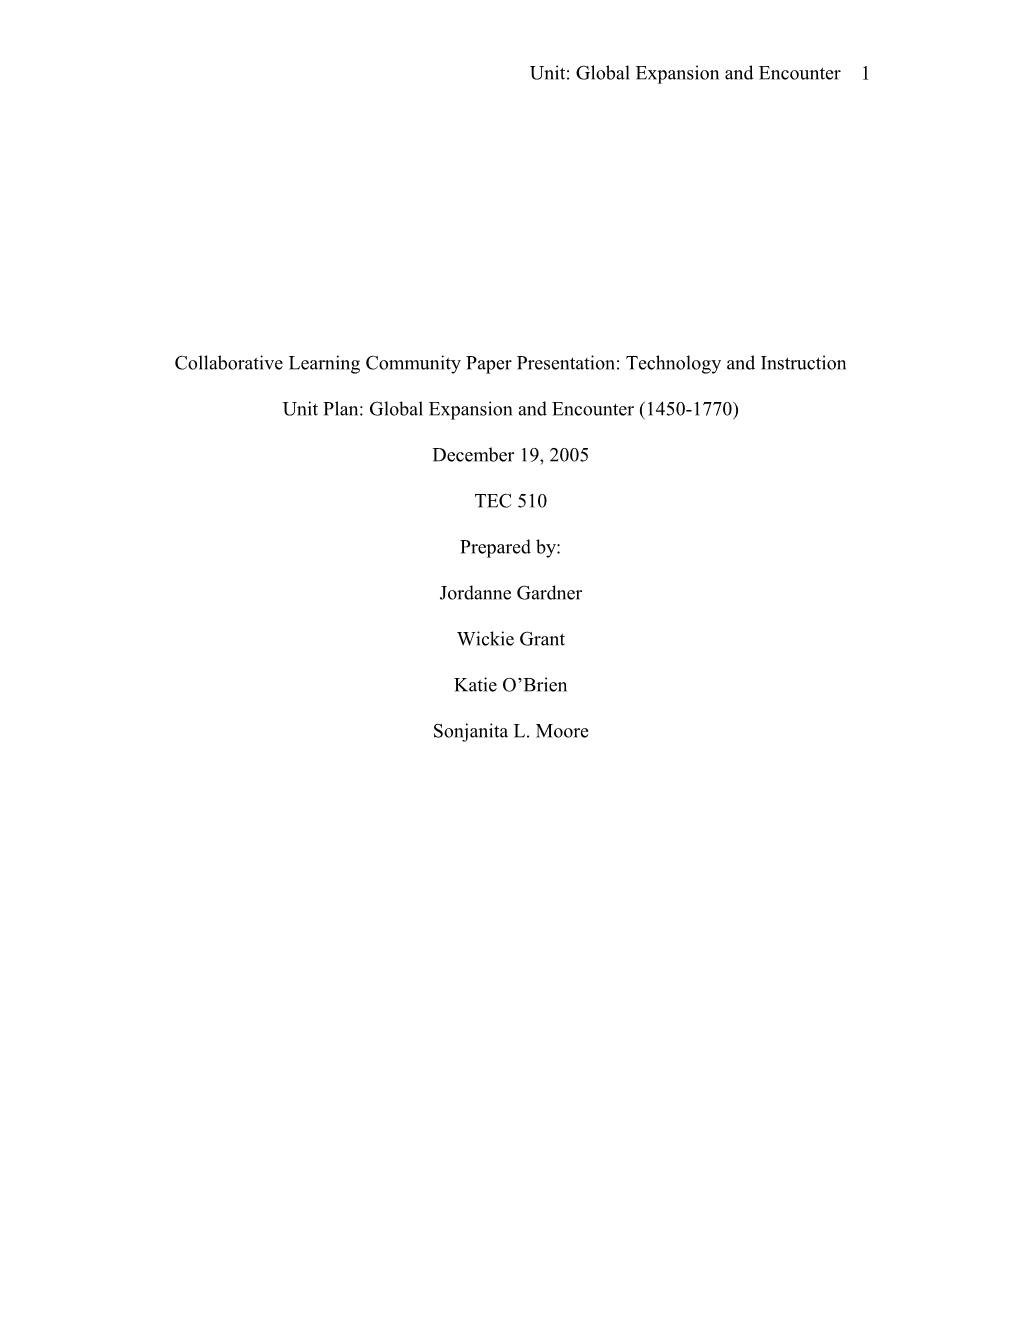 Collaborative Learning Community Paper Presentation: Technology and Instruction